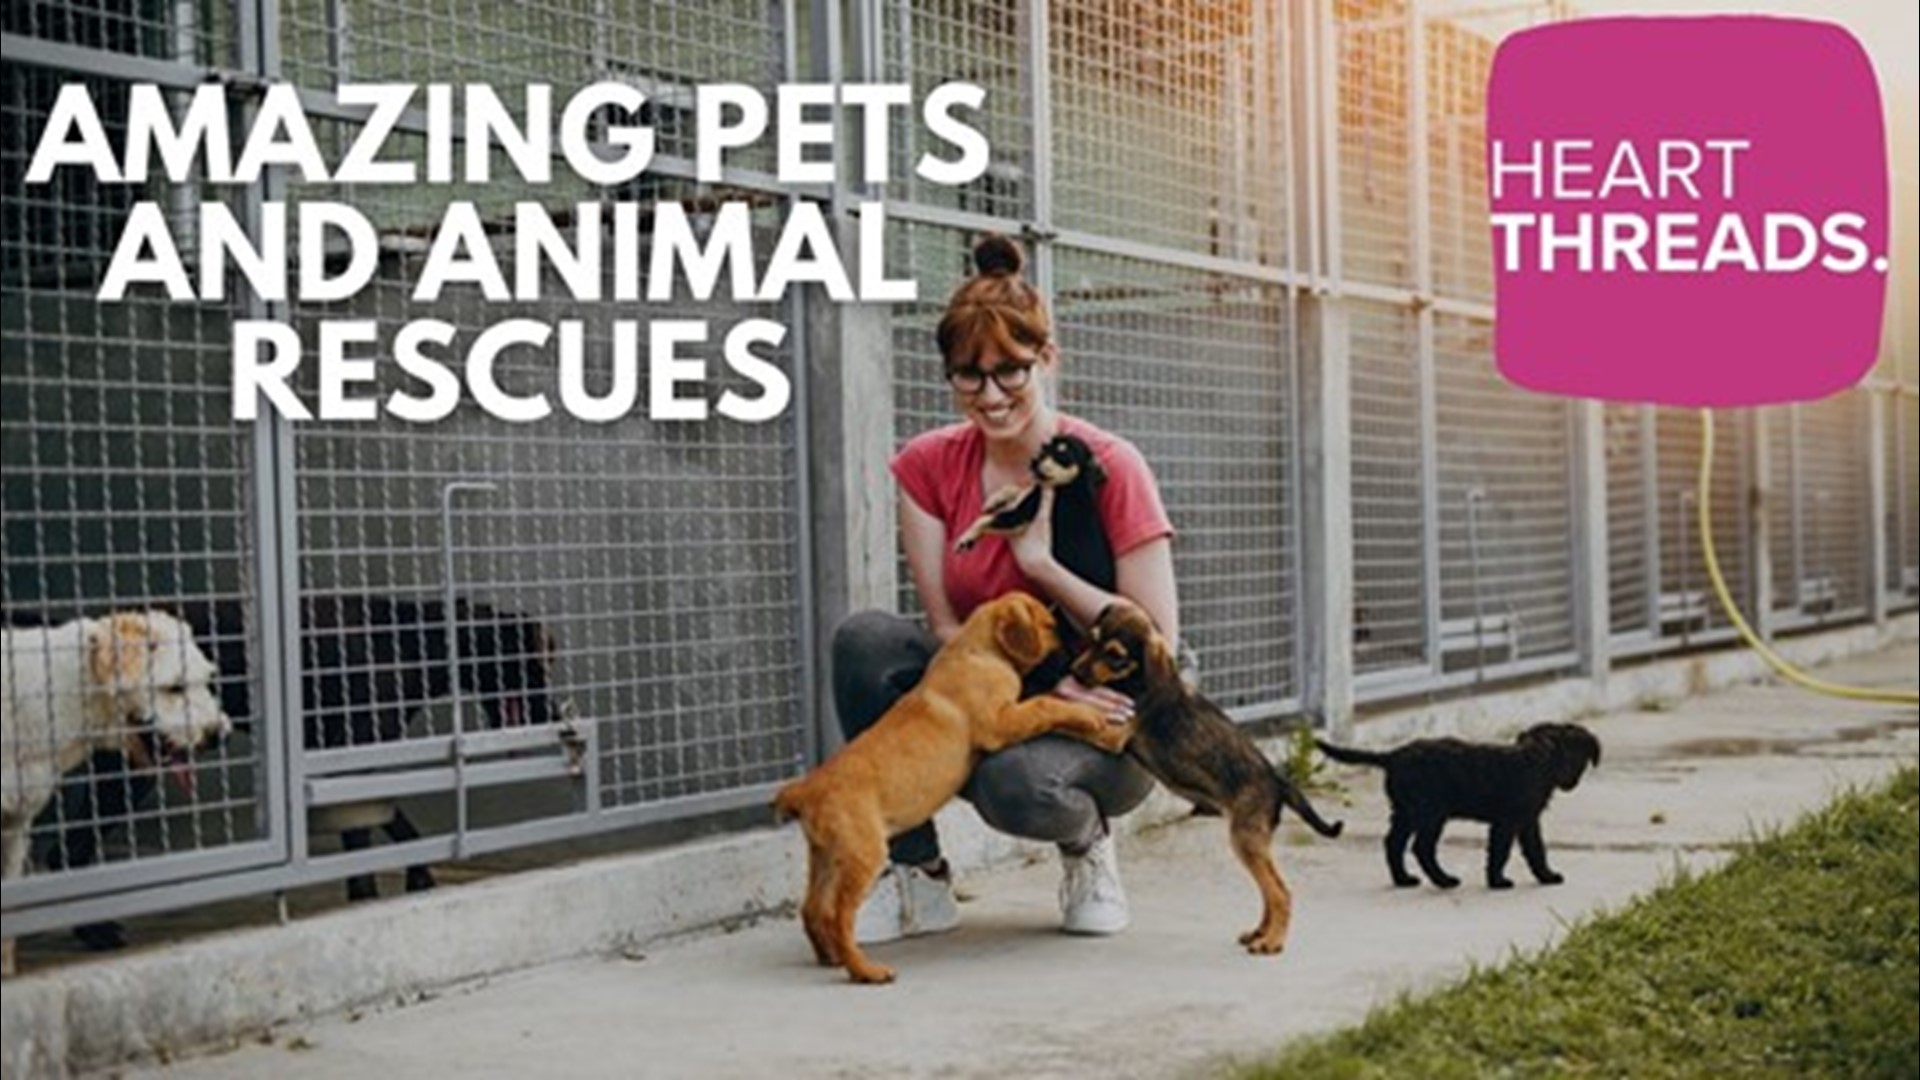 Heartwarming stories of animals rescued from bad situations and the people who are giving them a new outlook on life.